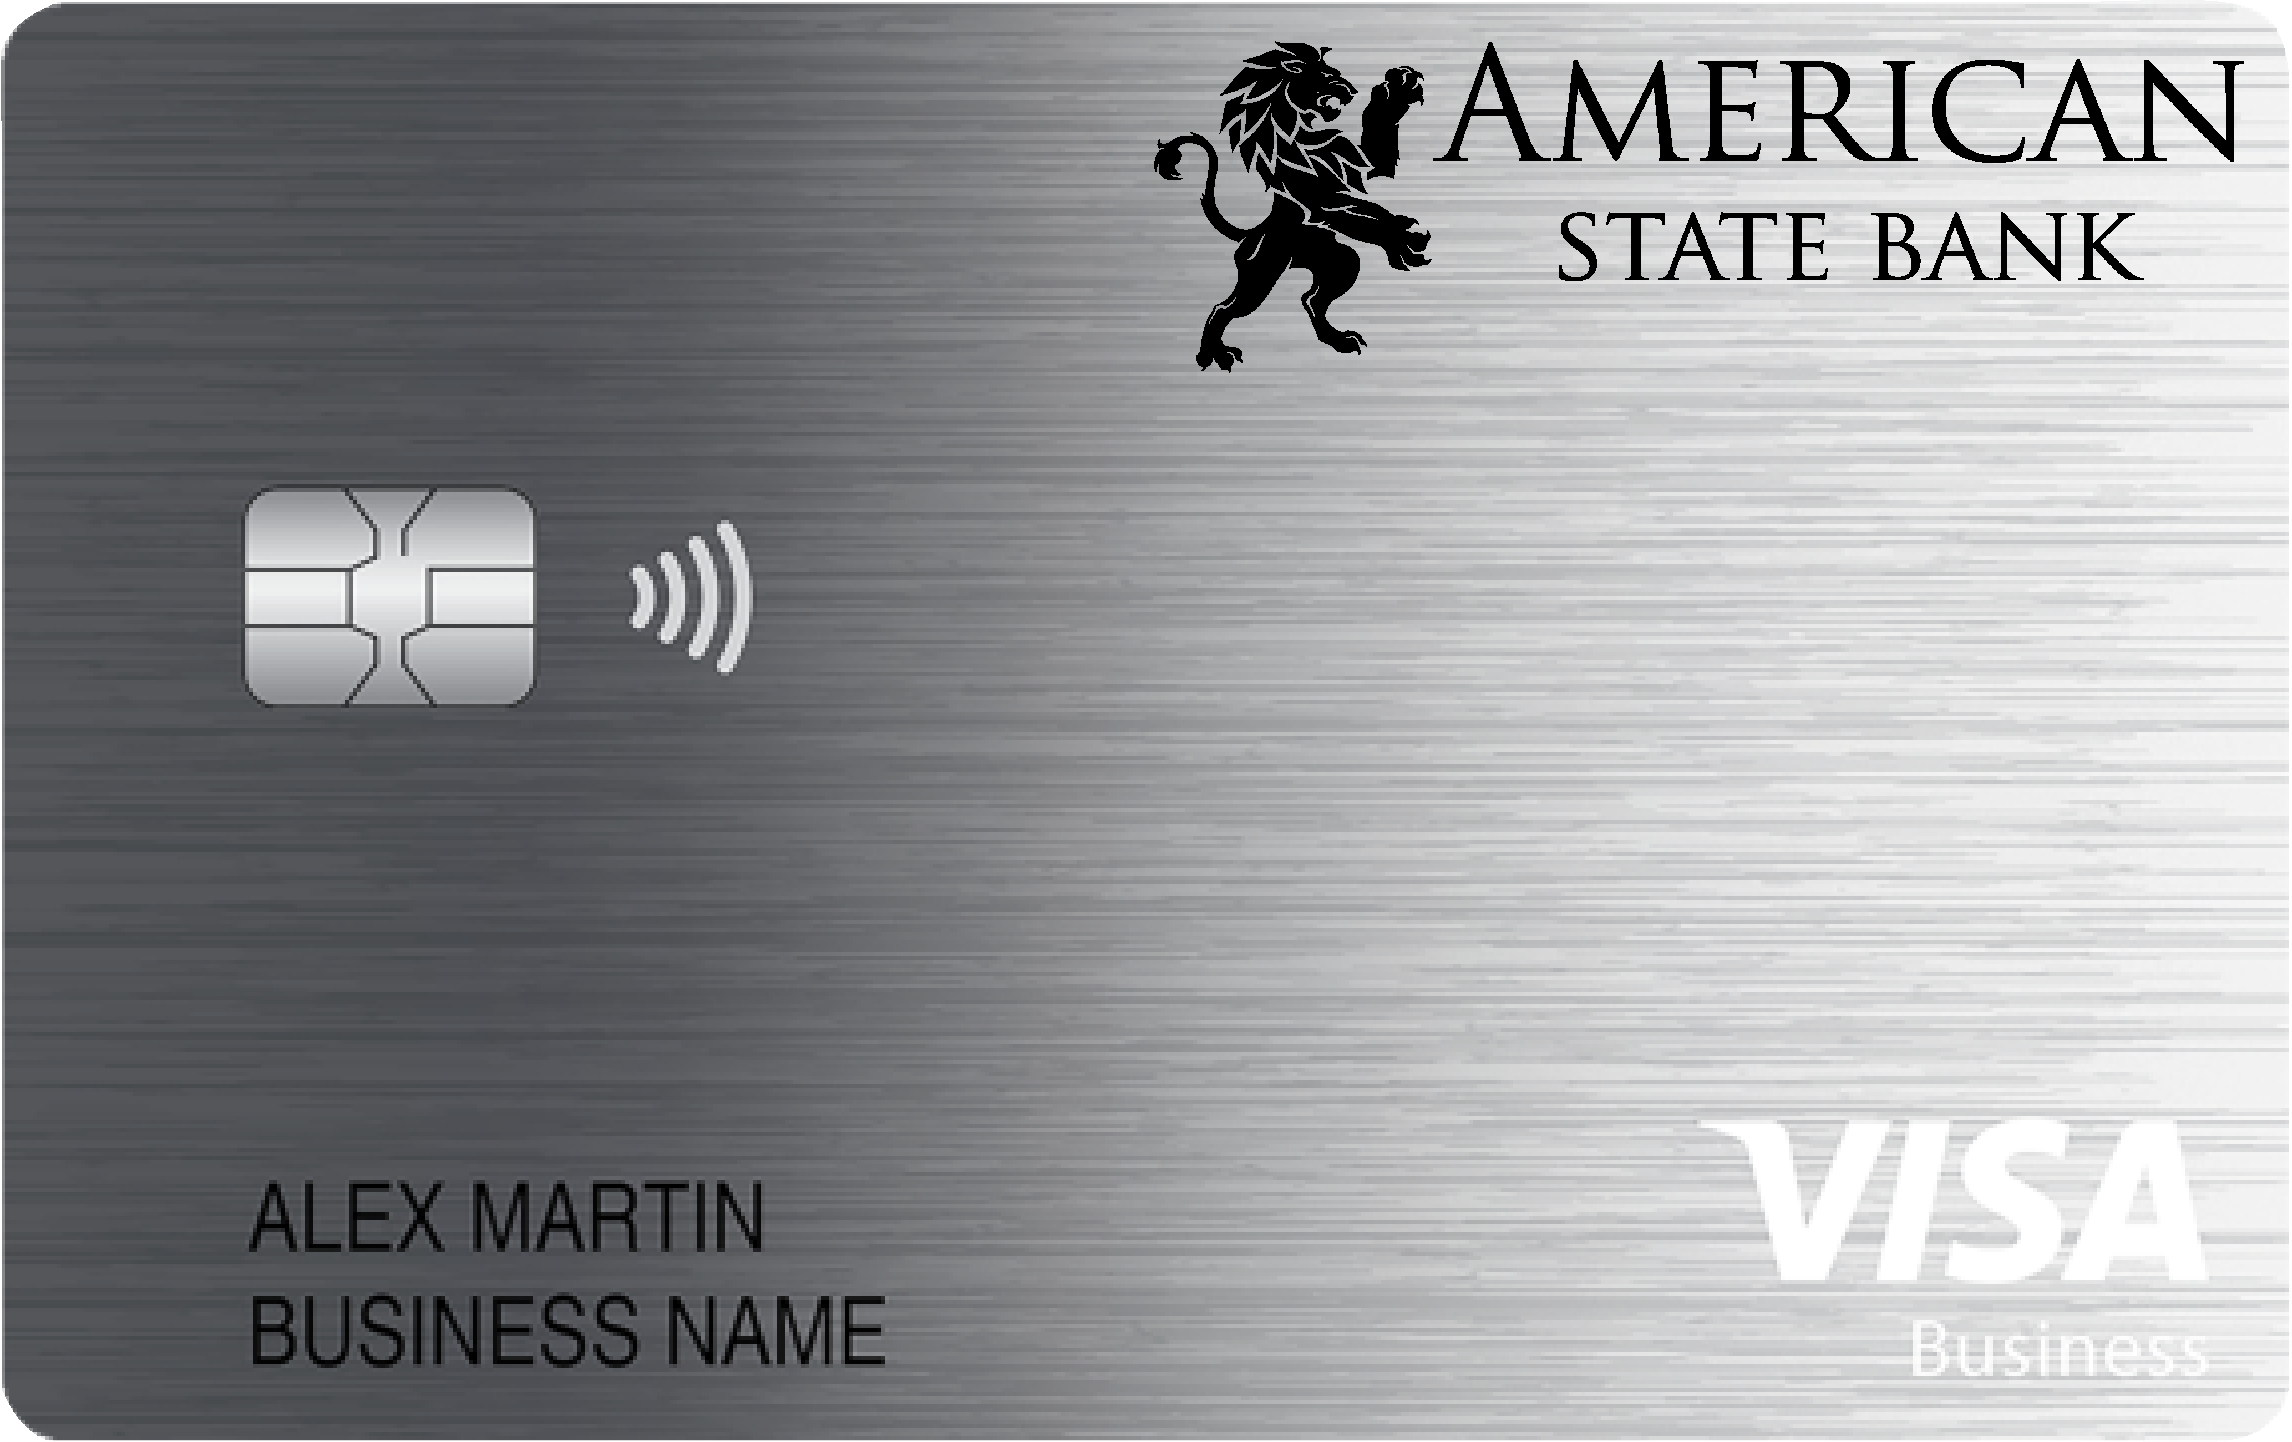 American State Bank Business Card Card